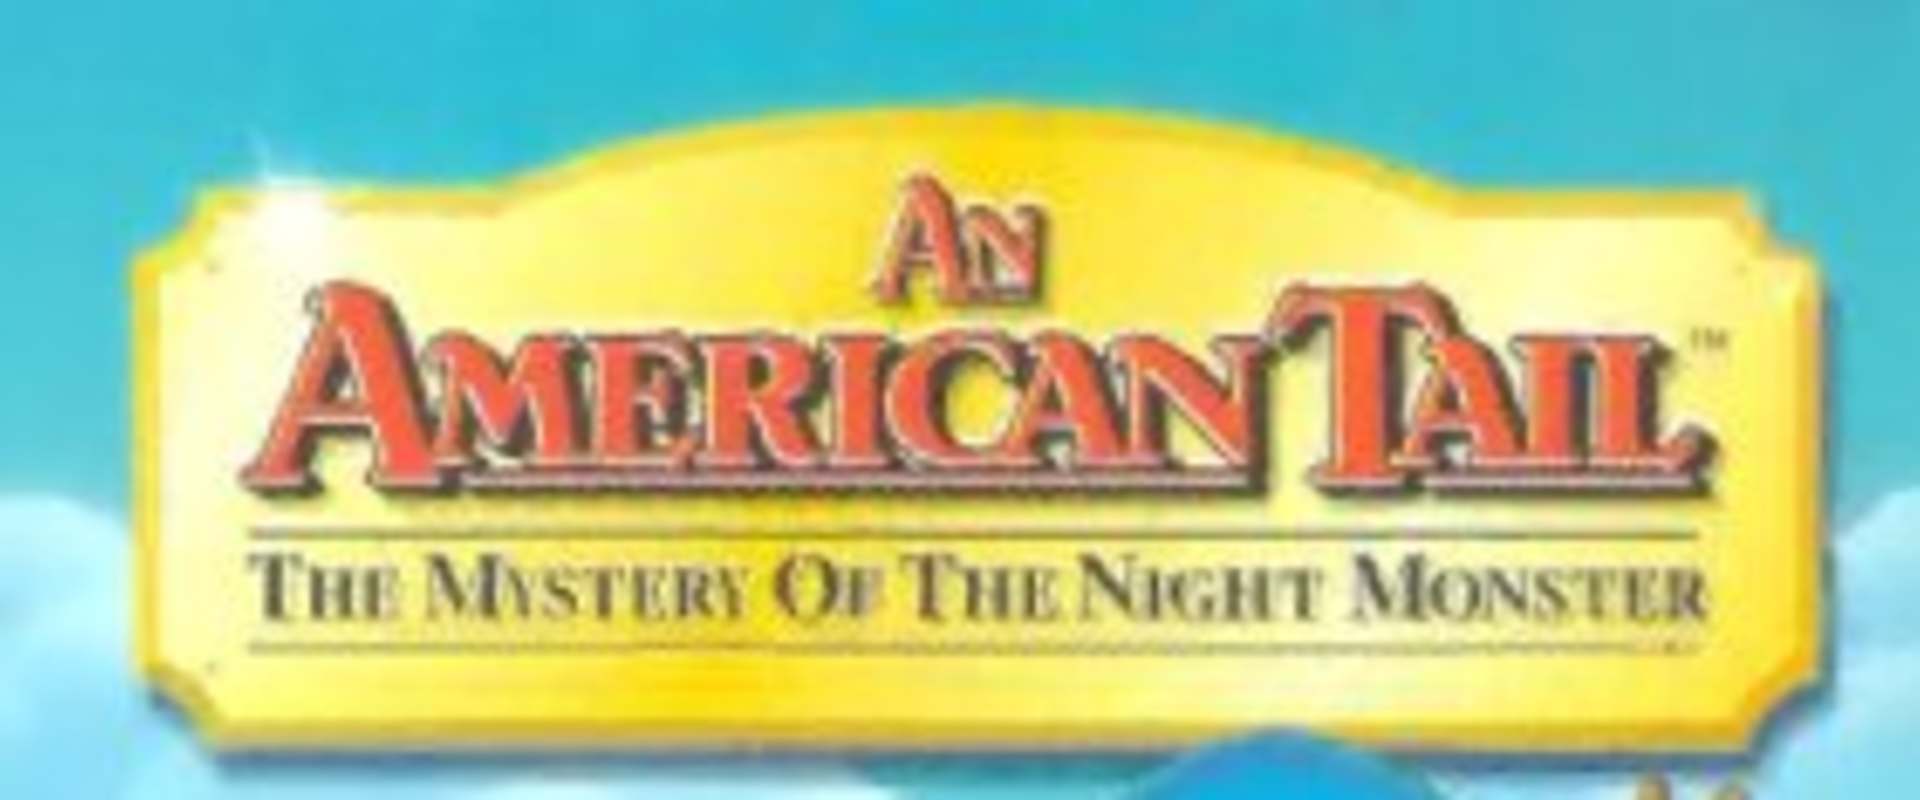 An American Tail: The Mystery of the Night Monster background 1